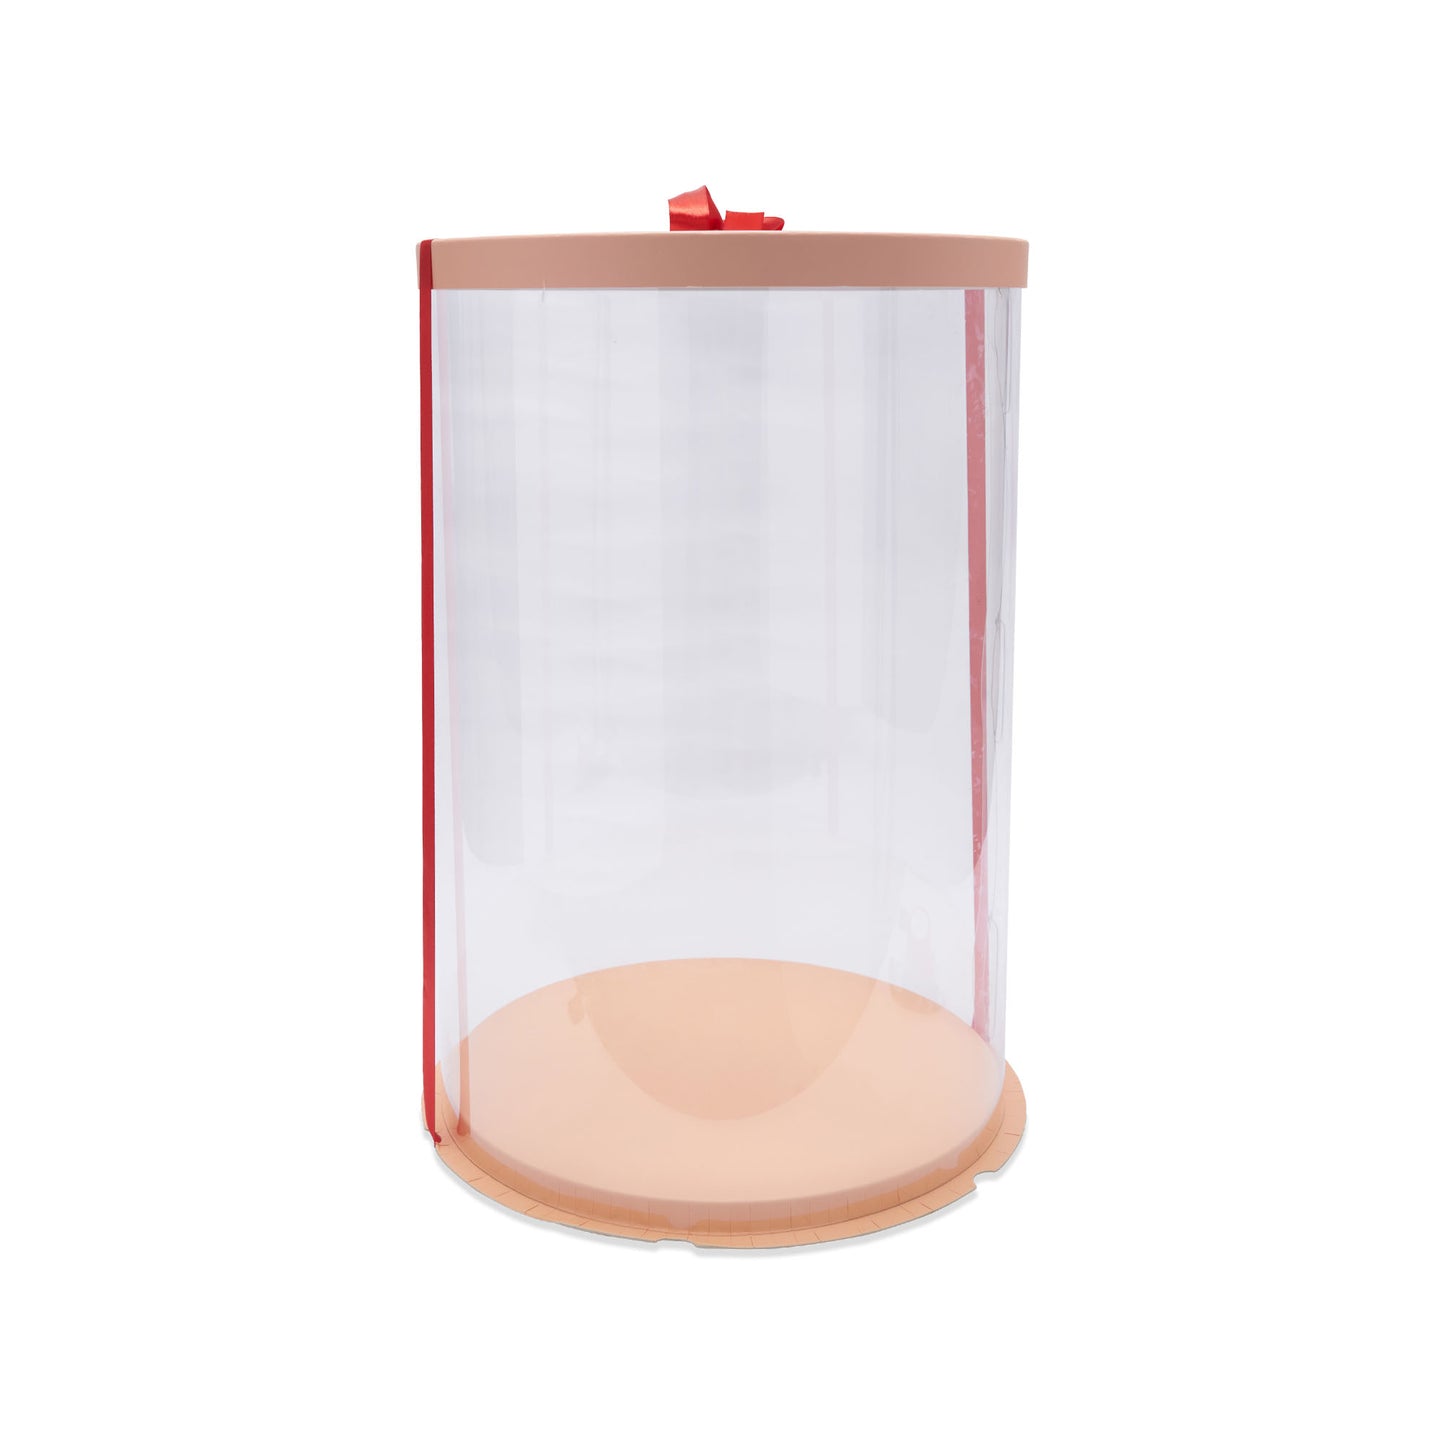 Large Cake Box With Transparent Lid